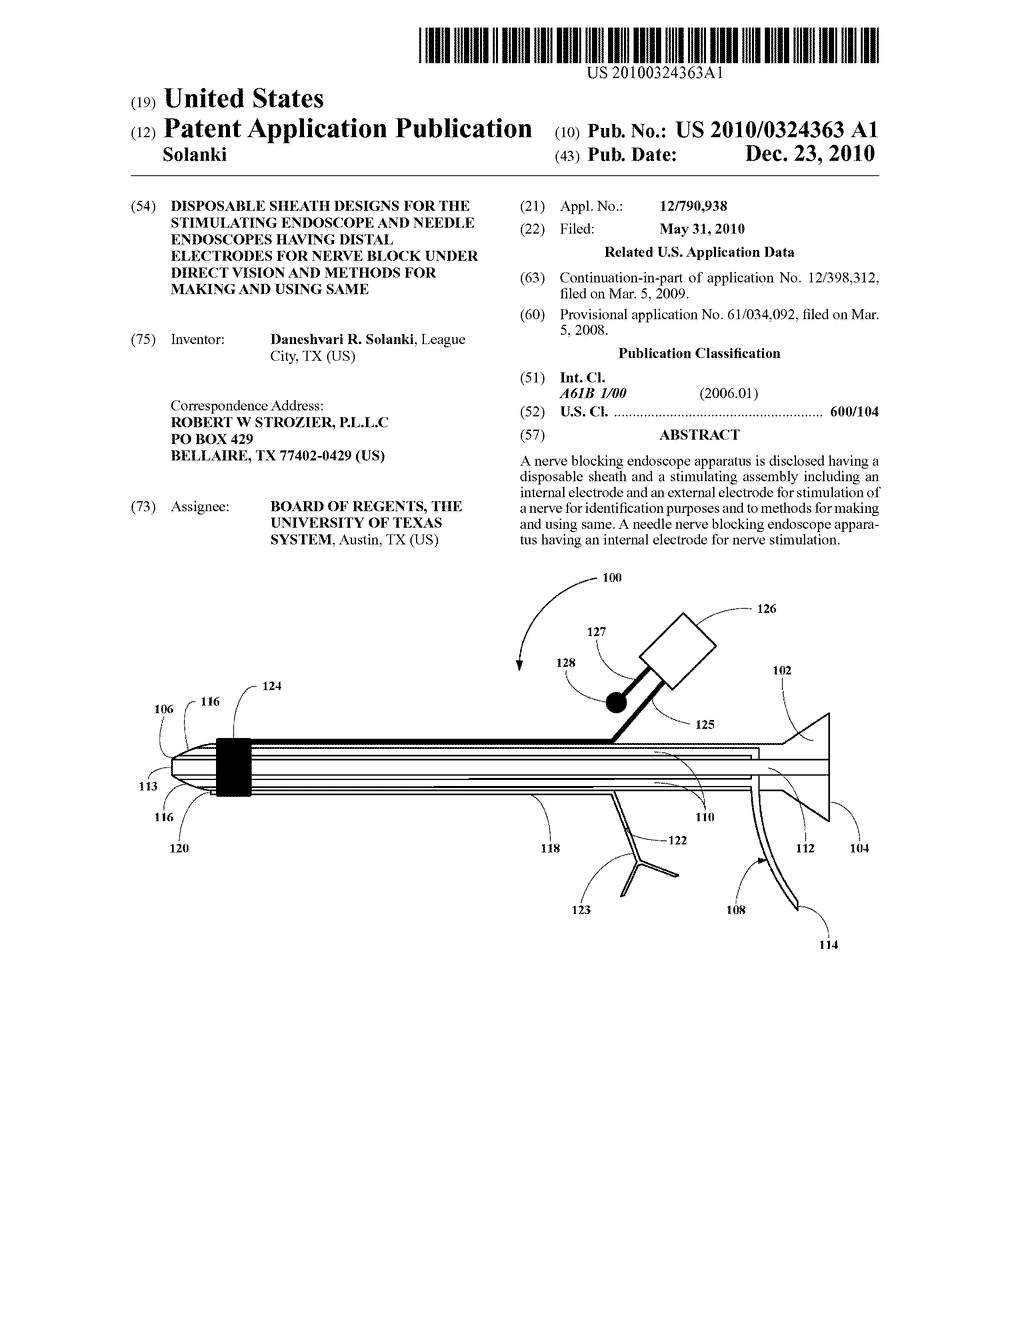 DISPOSABLE SHEATH DESIGNS FOR THE STIMULATING ENDOSCOPE AND NEEDLE ENDOSCOPES HAVING DISTAL ELECTRODES FOR NERVE BLOCK UNDER DIRECT VISION AND METHODS FOR MAKING AND USING SAME - diagram, schematic, and image 01